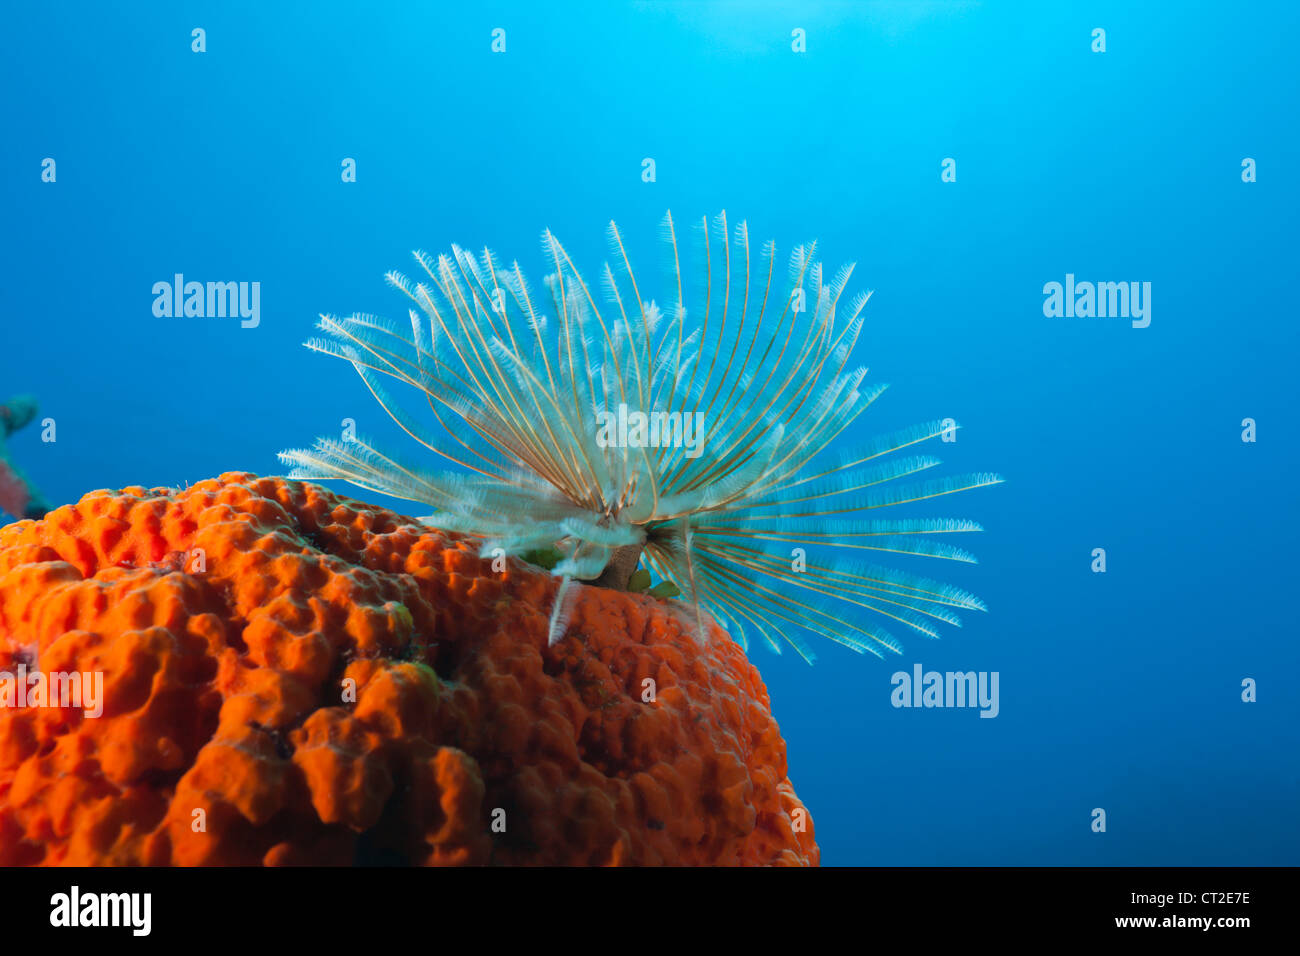 Fan Worm on red Sponge, Spirographis sp., Caribbean Sea, Dominica Stock Photo